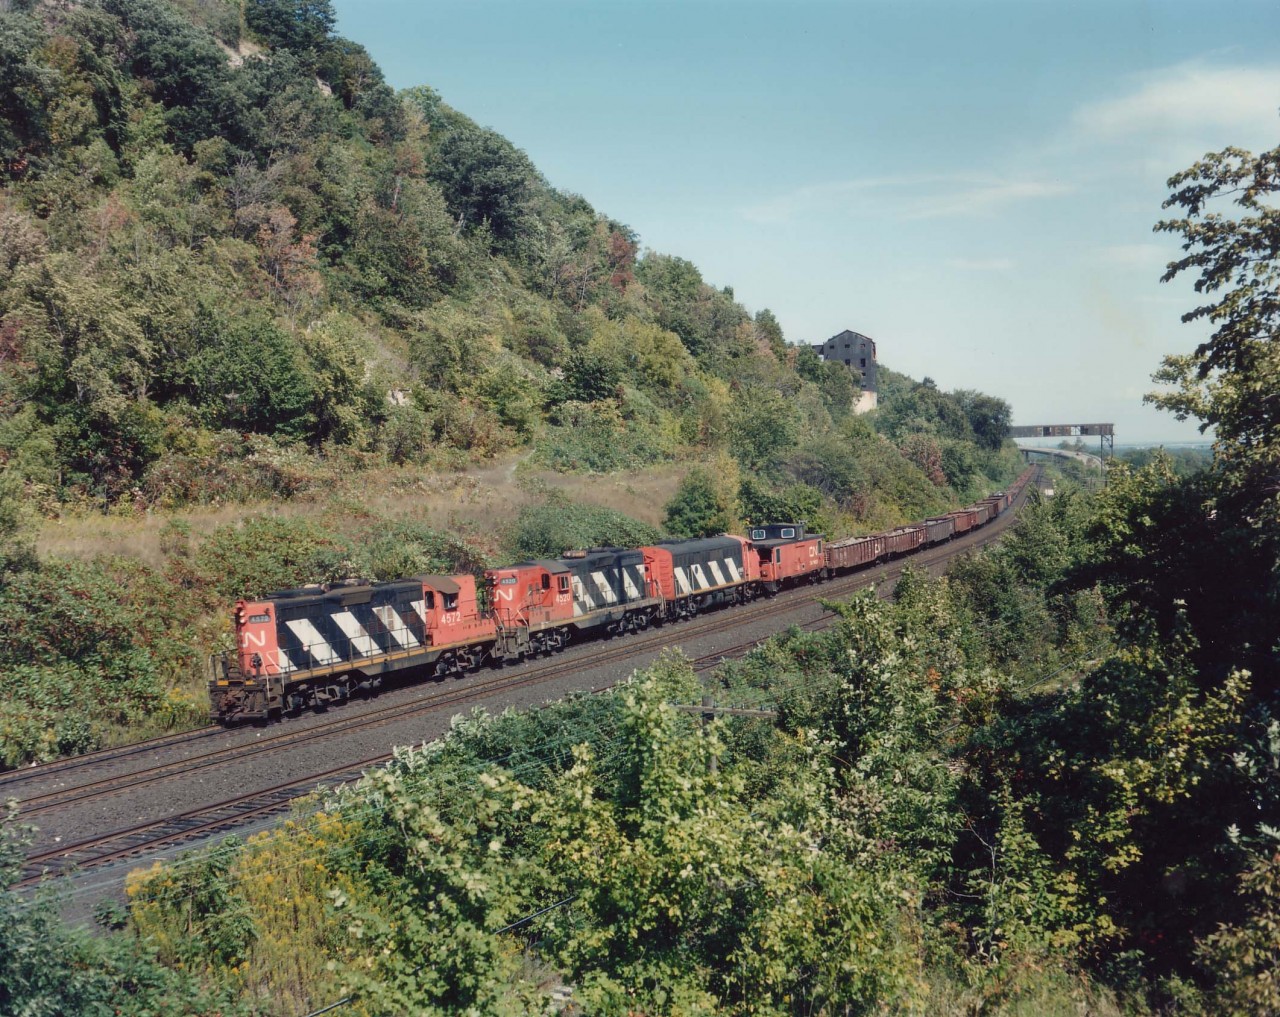 This view, from a hillside location now obliterated by ever expanding foliage, shows #725, "The Nanticoke" with CN4572, 4520 and 9166 the power heading West to Brantford and then south to Waterford & Nanticoke. The view was imaged with a 4x5 Speed Graphic using Kodak Vericolour III type S sheet film for anyone interested.
For Mr. H.T.Greb  :o) in the far distance one can see the old conveyer structure that RP.ca #7210 was imaged from; the south end long removed and screened off. Holes in the structure made for good viewpoints, holes in the floor a must to avoid.
It is only grasses where the track used to run up to the large building where cars were loaded when the operation was in full swing, and just barely in the weed above the cab of the middle unit one can see where the old incline ran up the hillside. It is now a hiking path. Building and overhang removed in the mid-90s, I think.